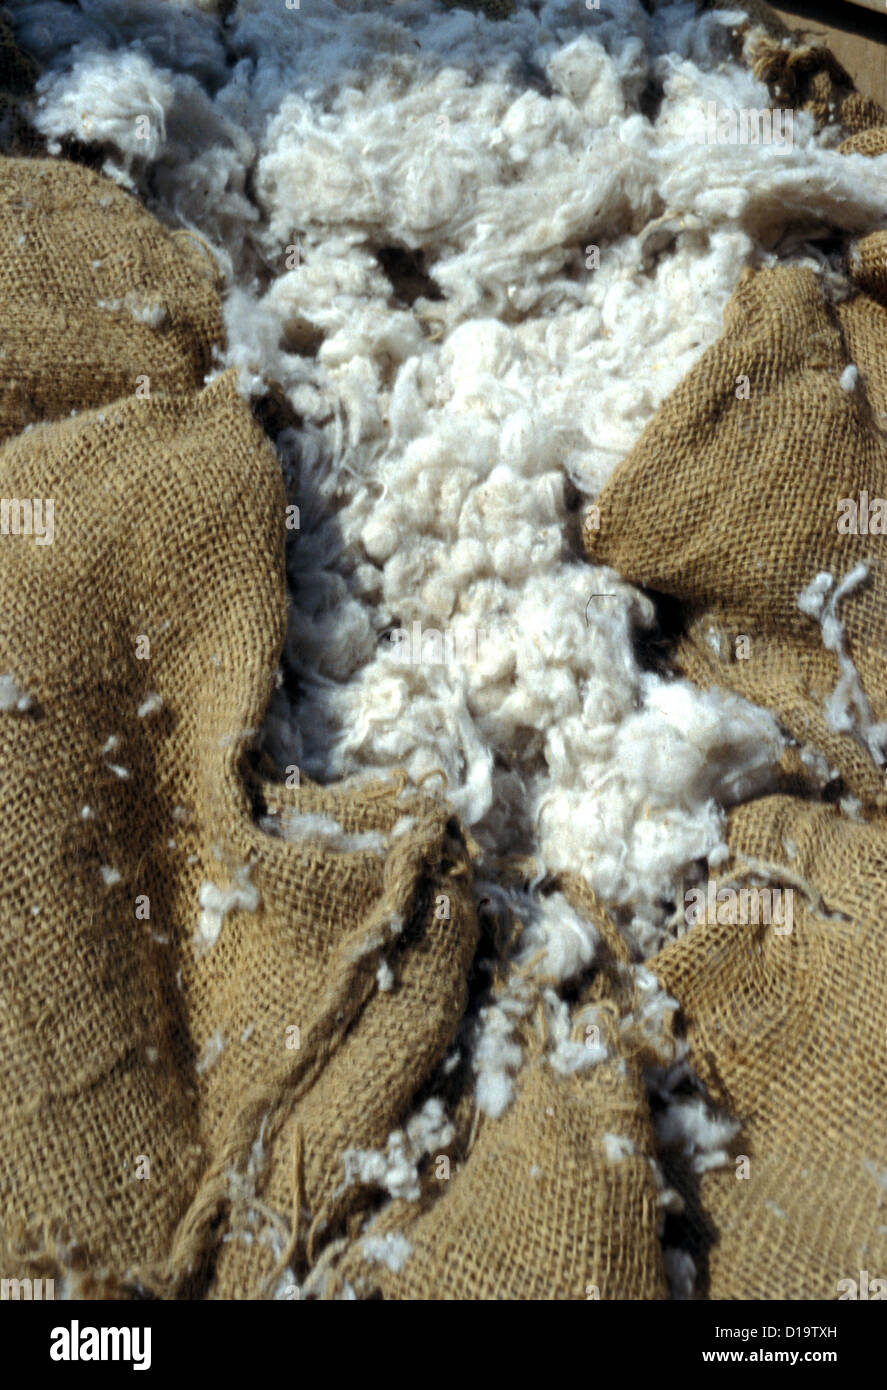 Raw cotton bagged for market in the Gezira region of the Sudan Stock Photo